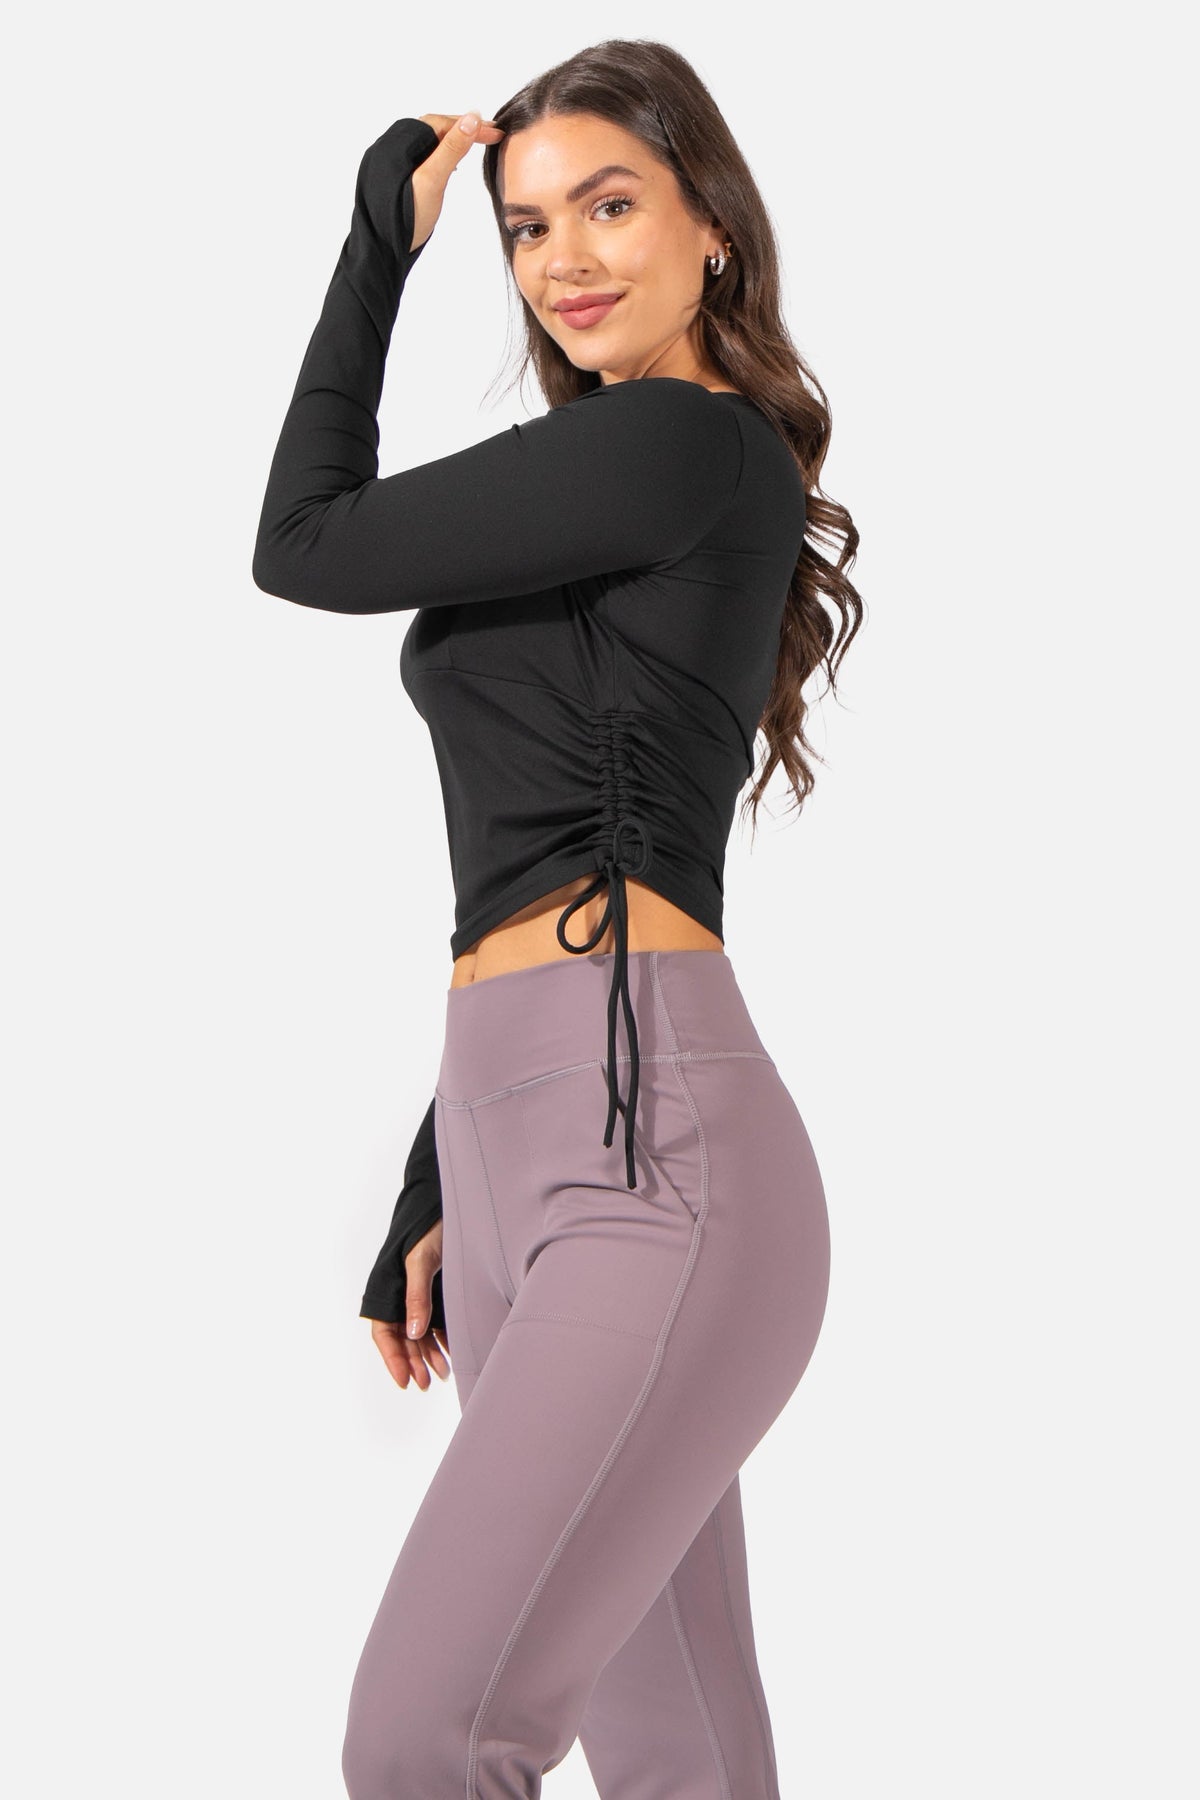 Gymshark Top Size M Black Long Sleeve Crop Cut-Out Mesh Womens Work-Out